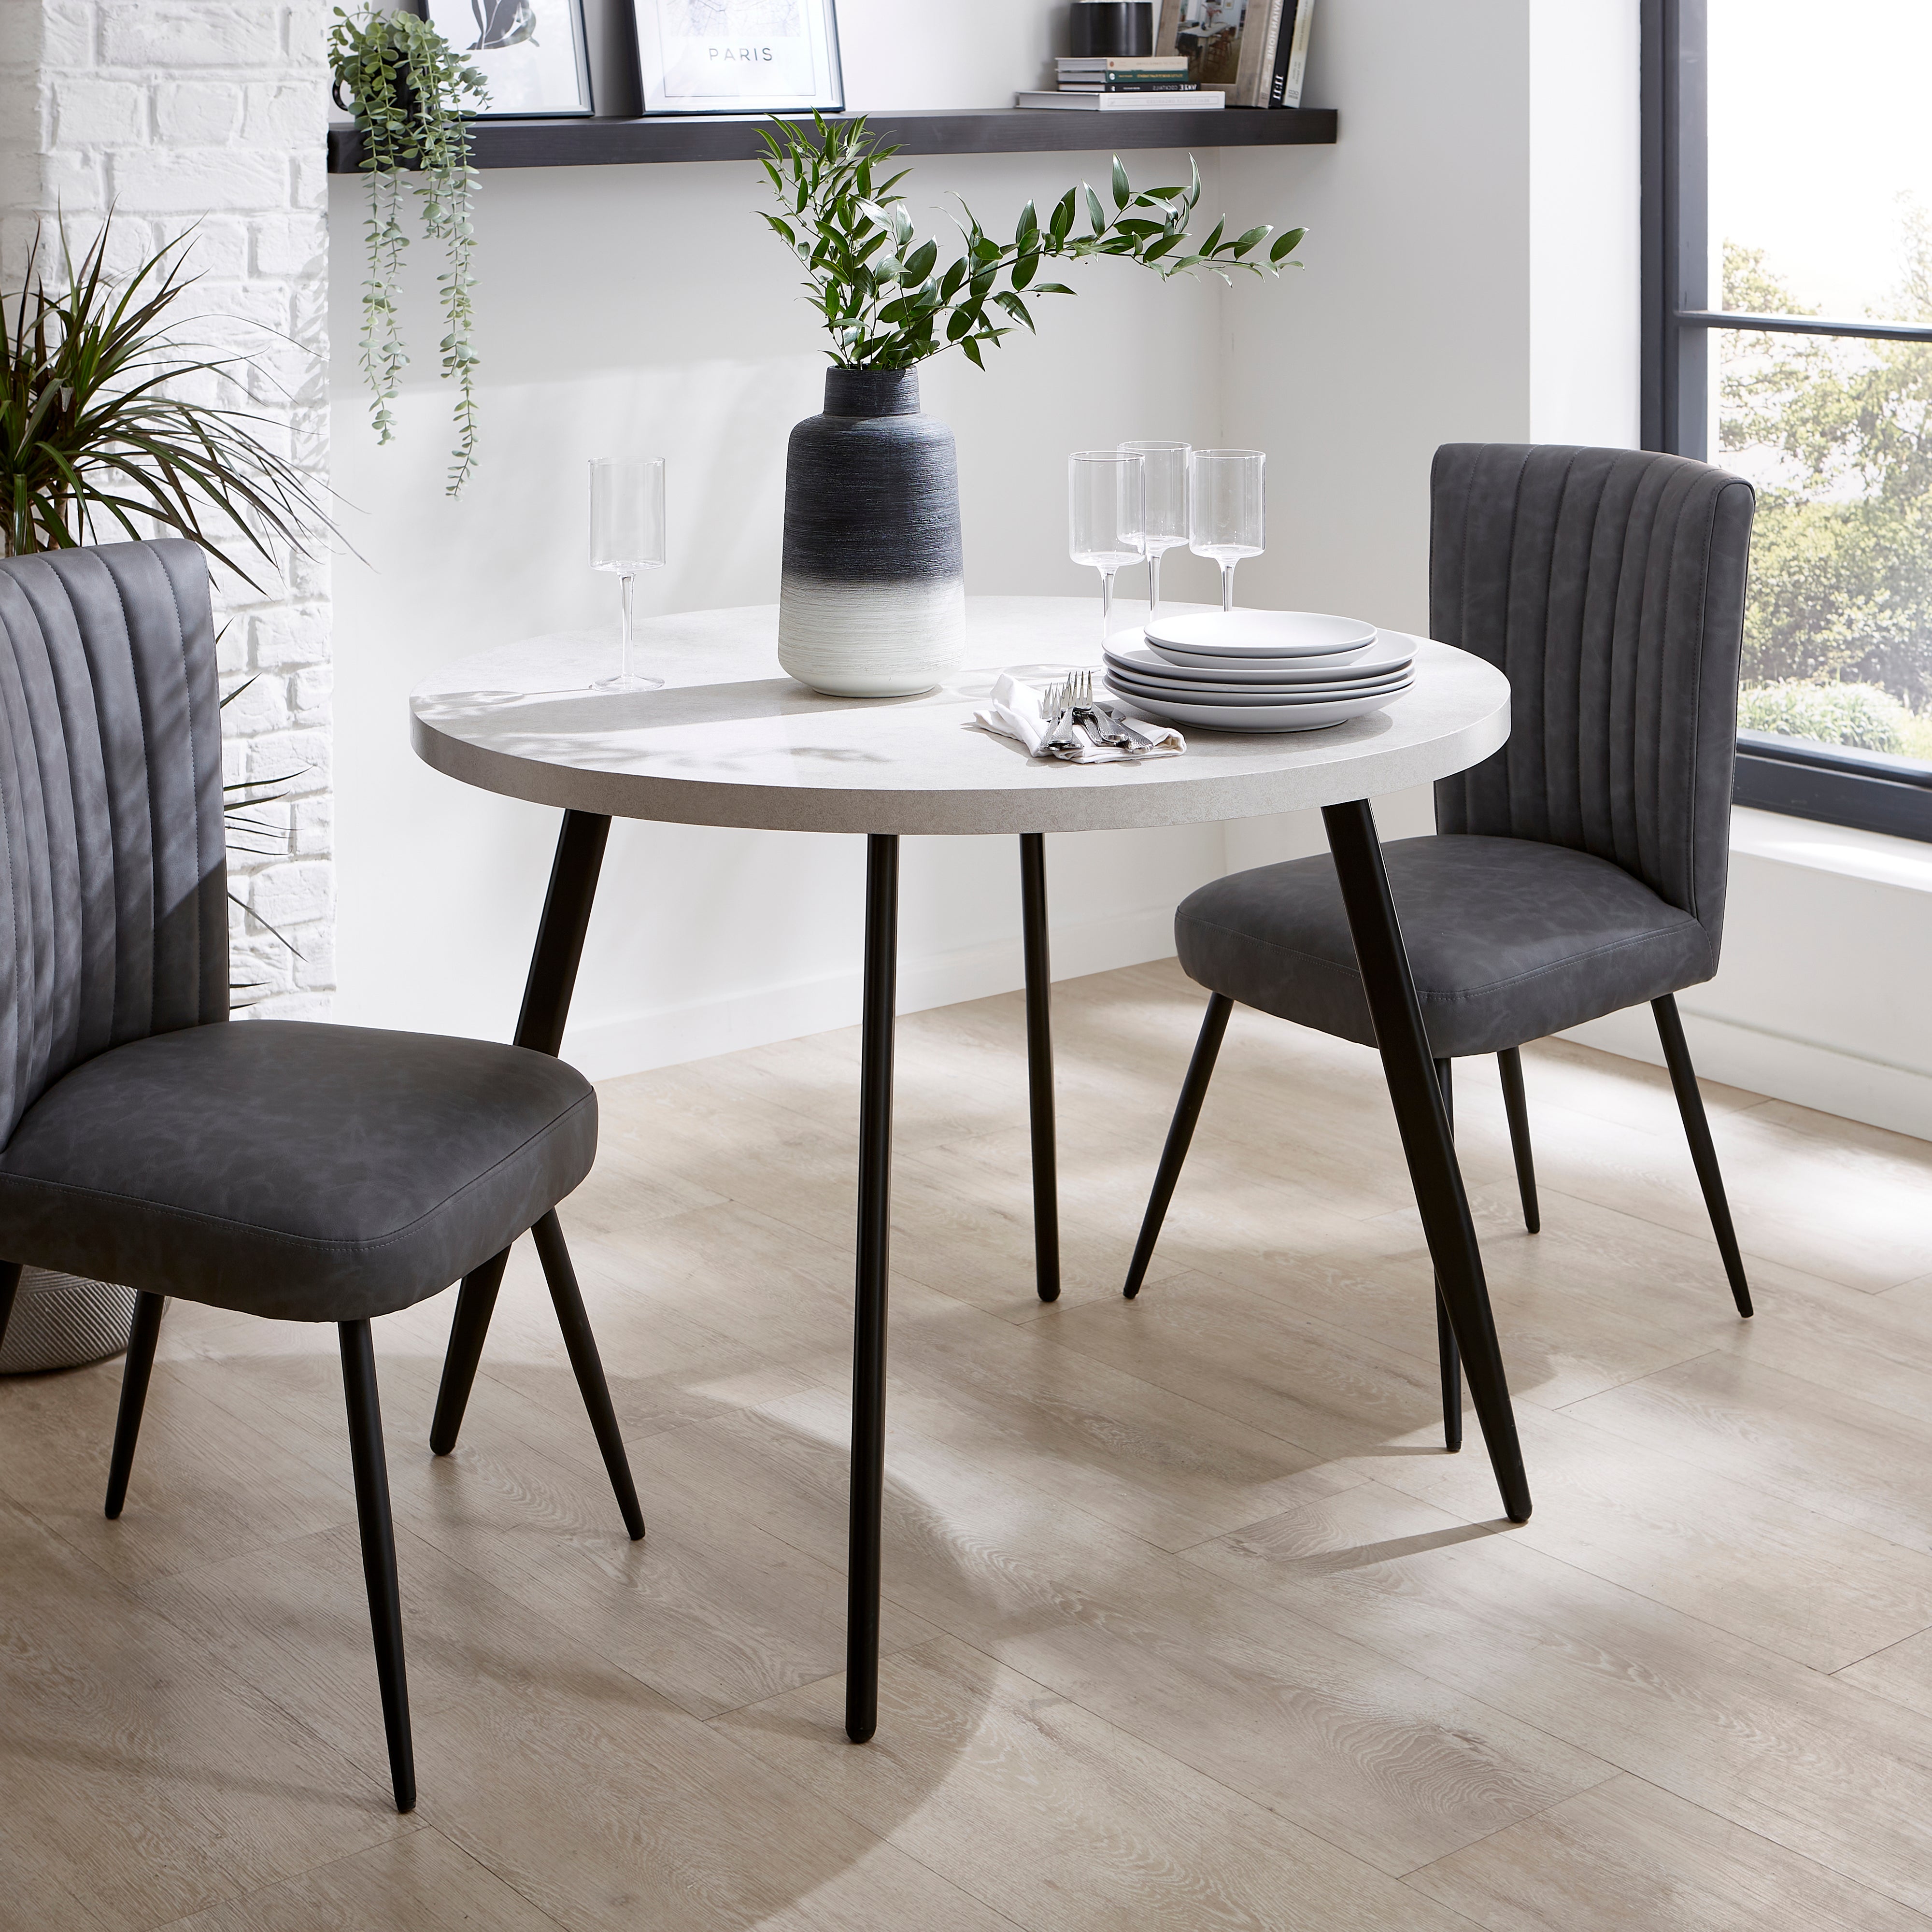 Zuri 4 Seater Round Dining Table Concrete Effect Grey